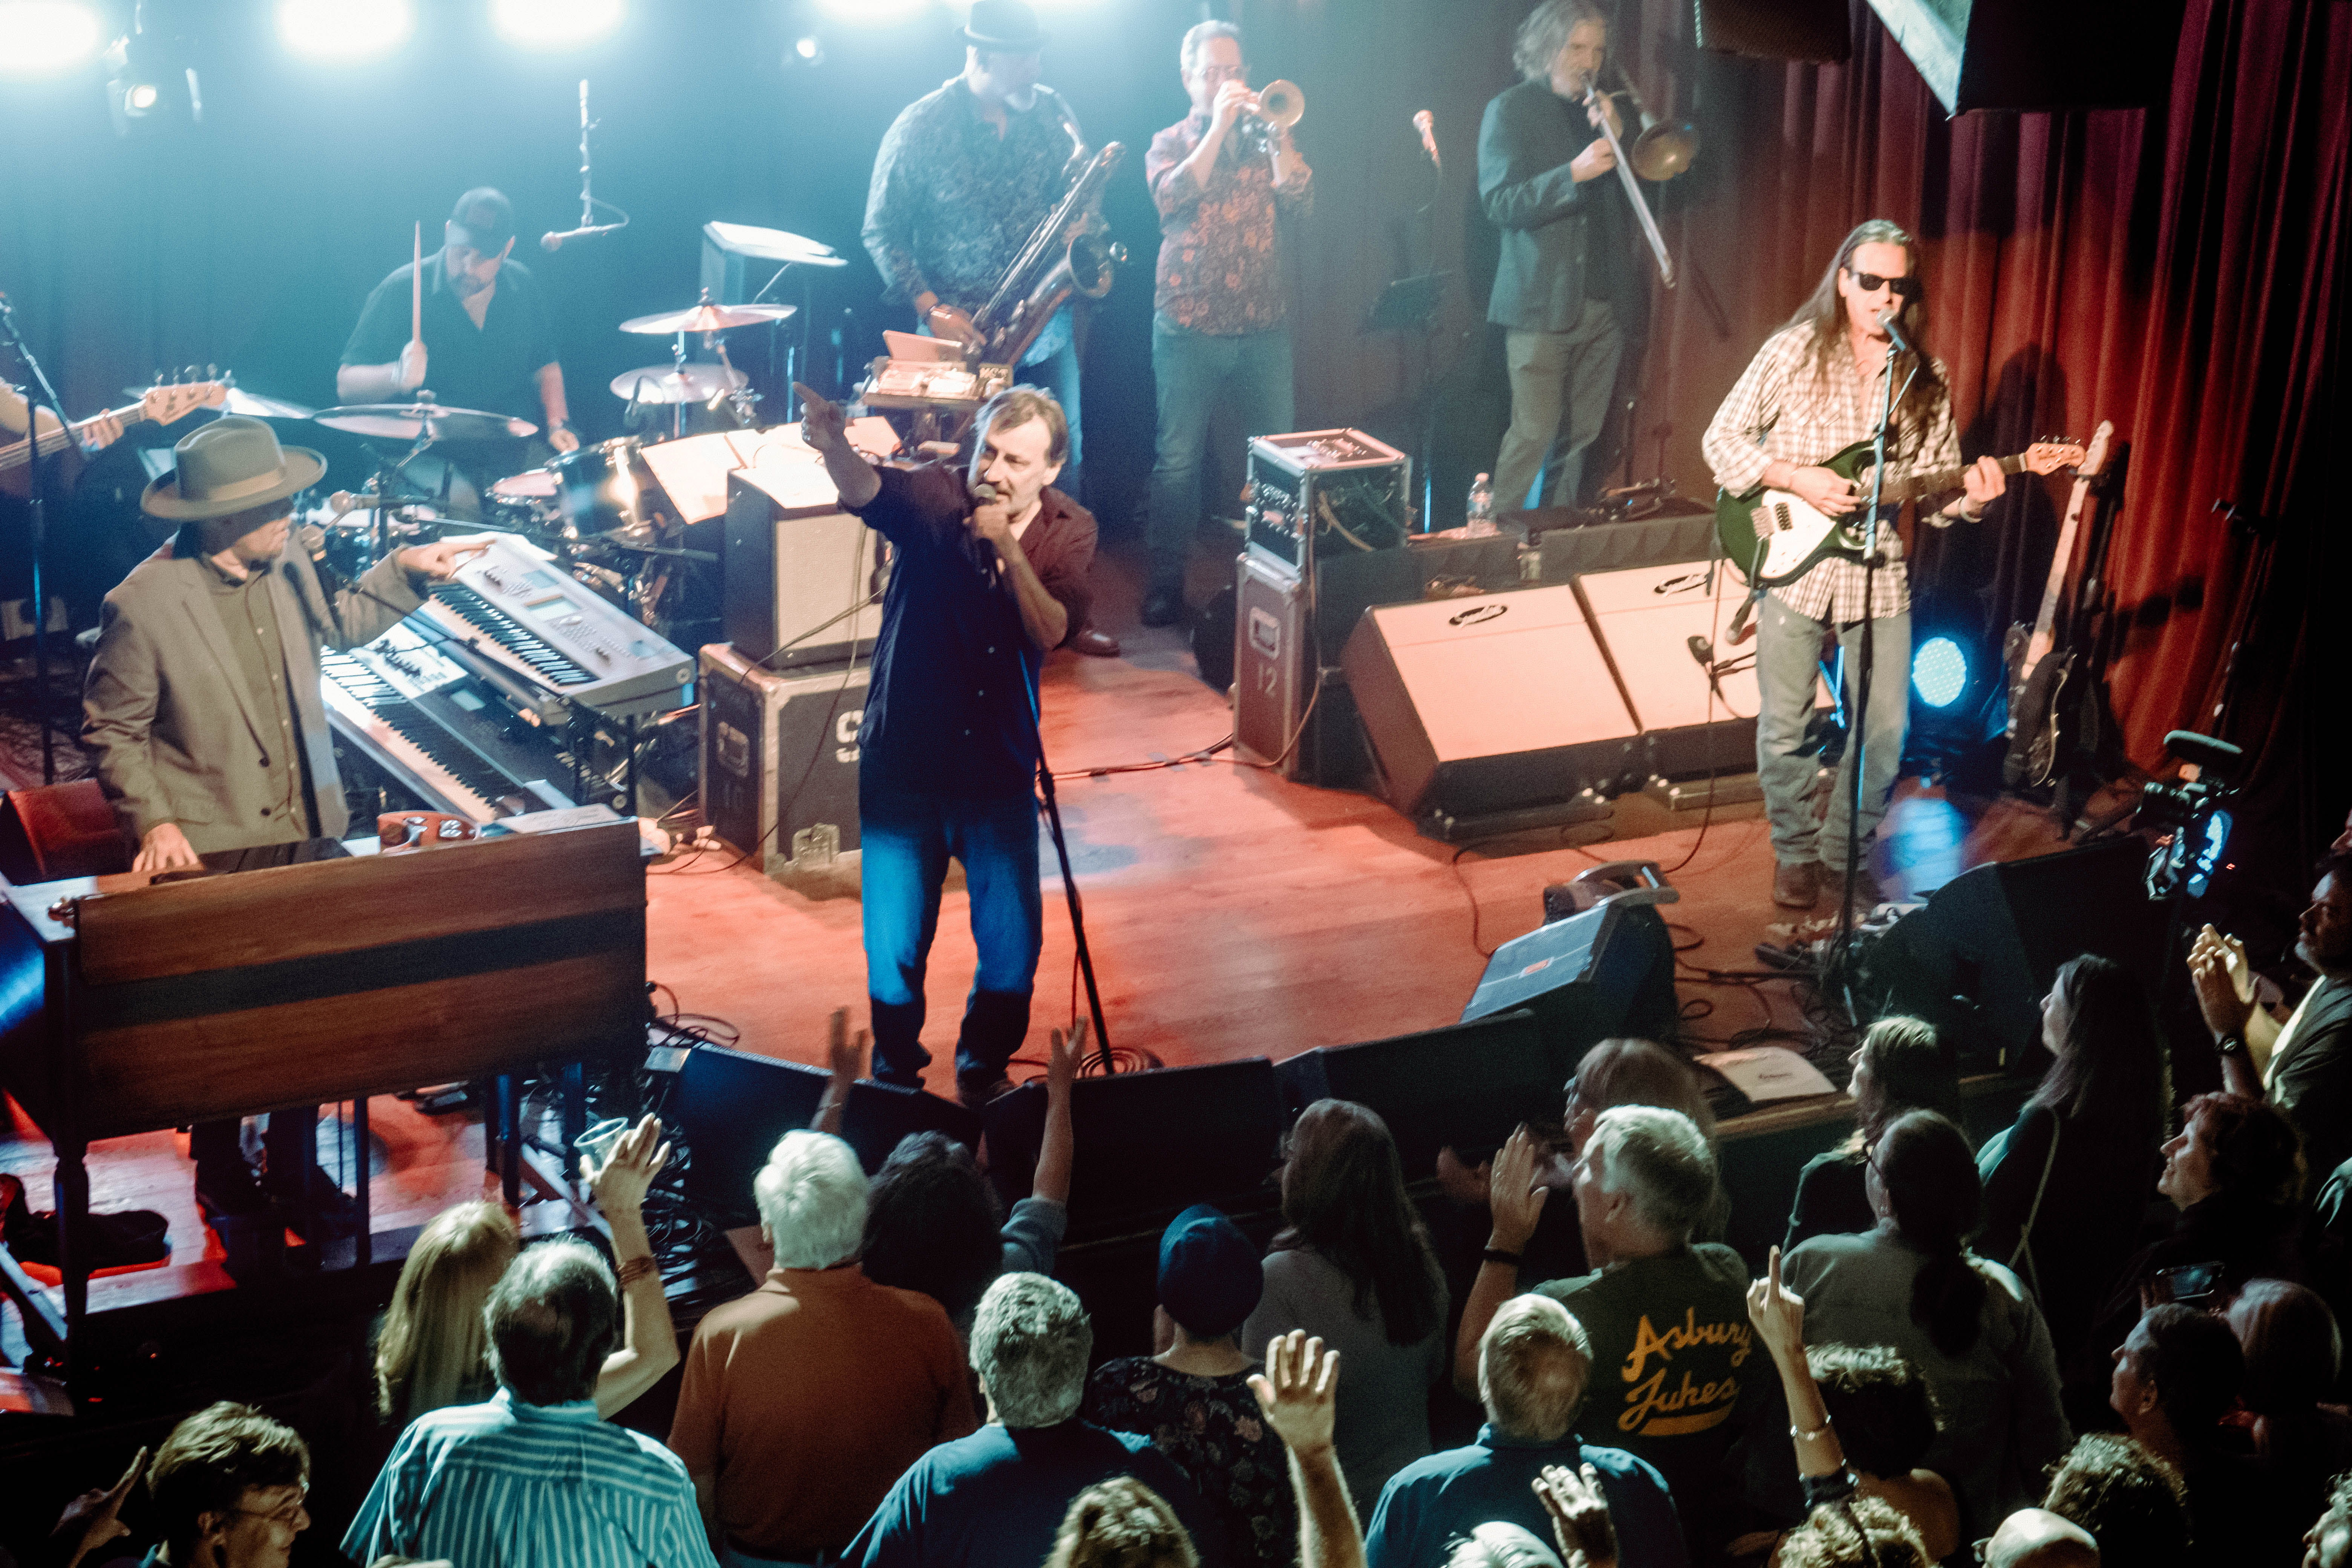 Ripplewood 5 Year Anniversary with Southside Johnny & the Asbury Jukes 4/19/23